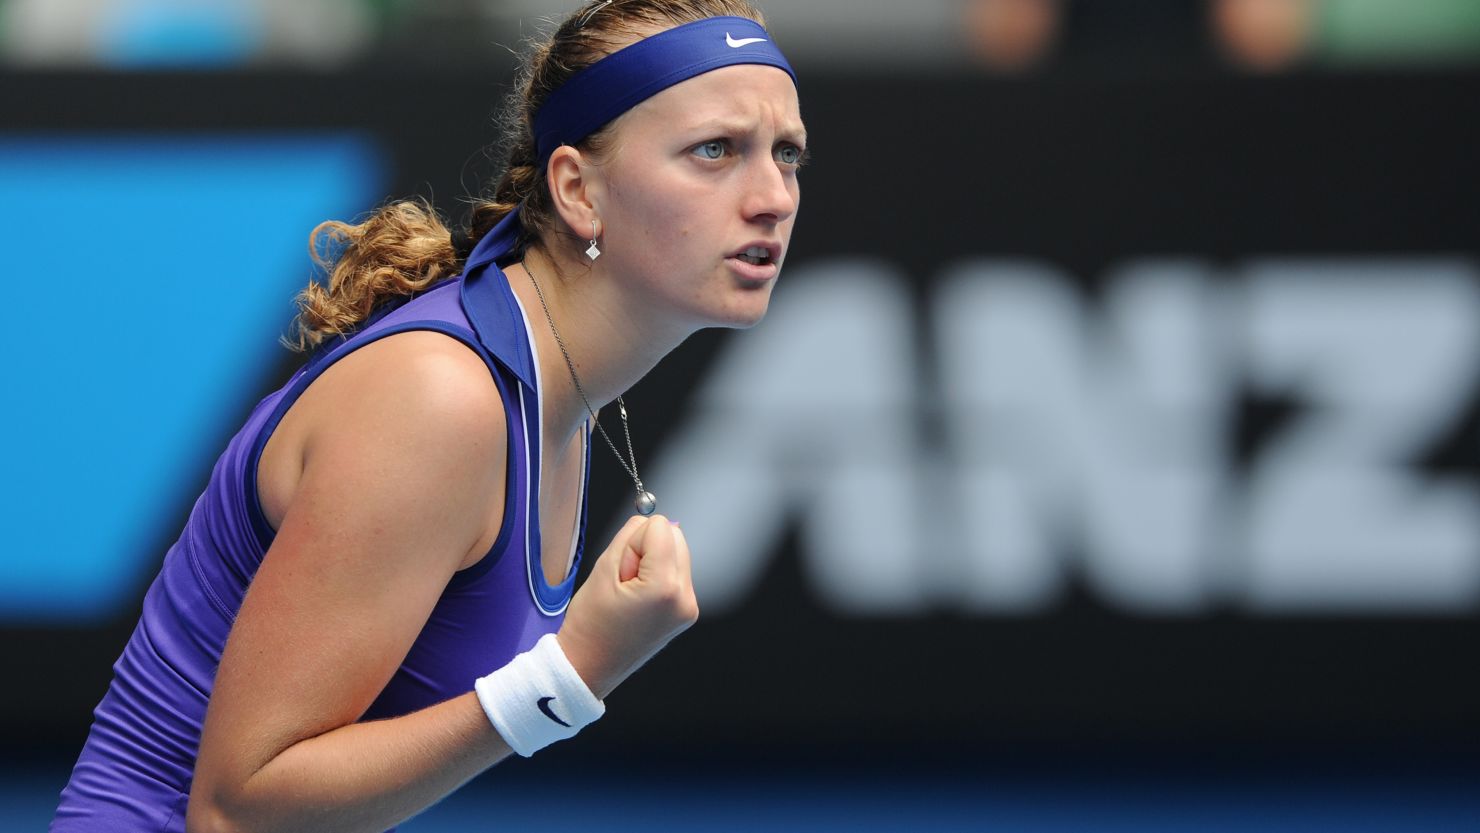 Second seed Petra Kvitova is seeking to move to the top of the world rankings for the first time.